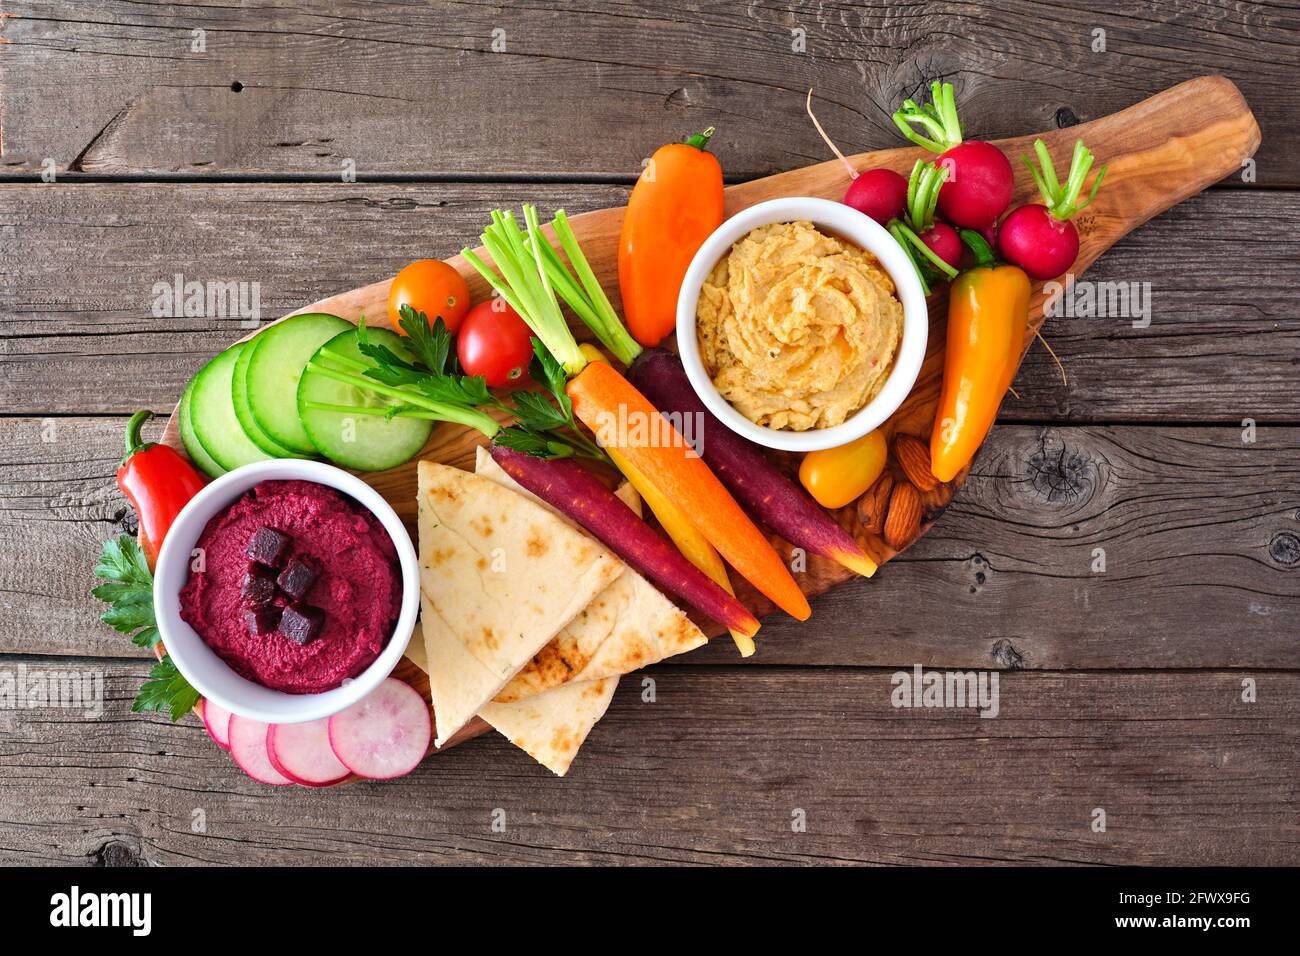 Assortment of fresh vegetables and hummus dip on a serving board. Top view on a rustic wood background. Stock Photo